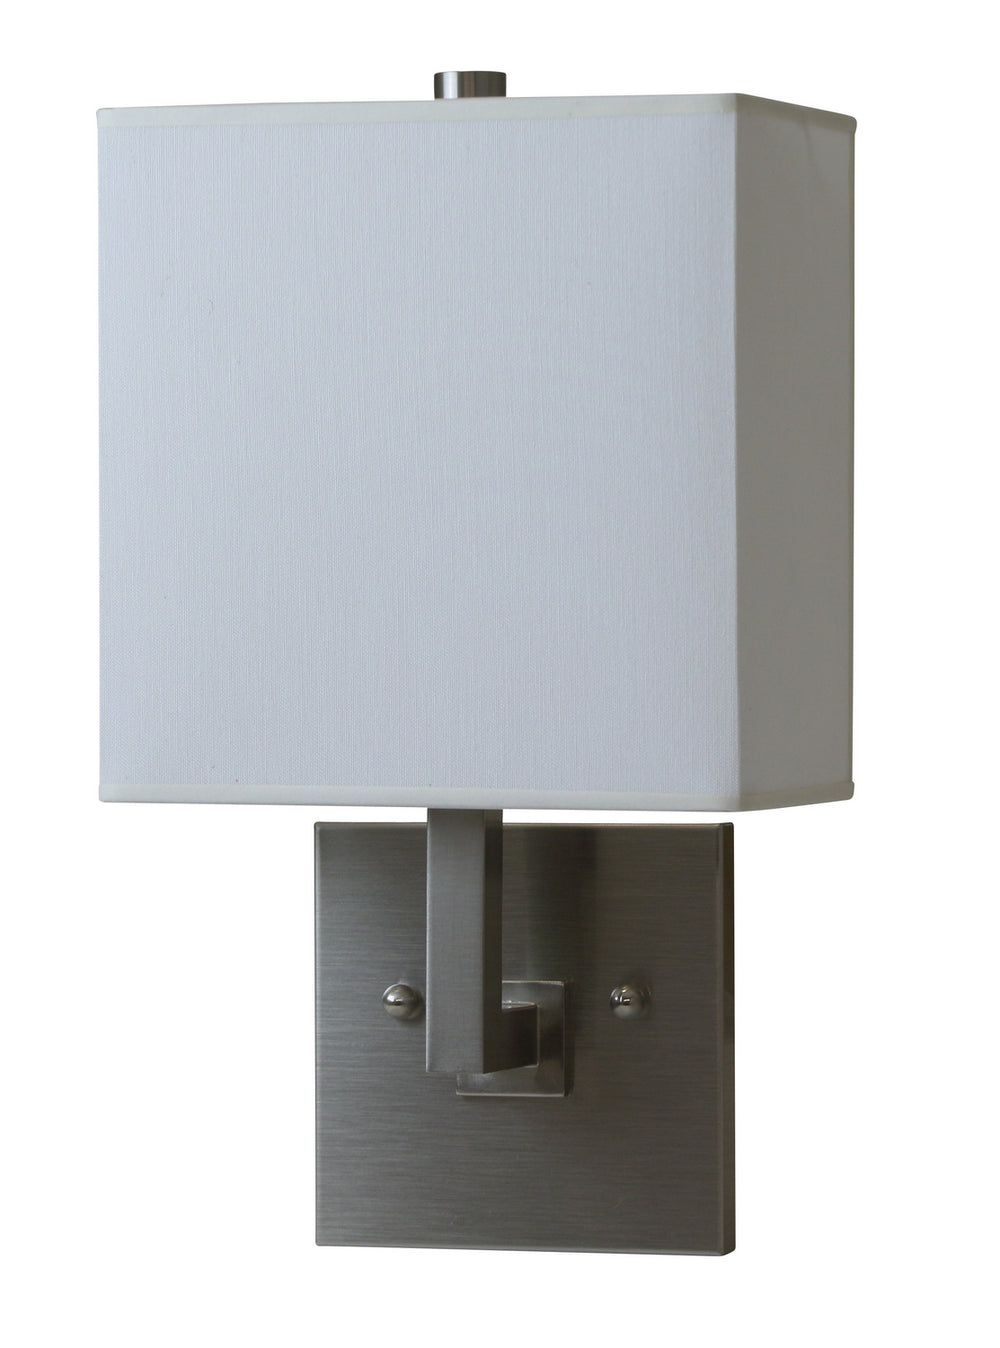 House of Troy - WL631-SN - One Light Wall Sconce - Wall Sconce - Satin Nickel